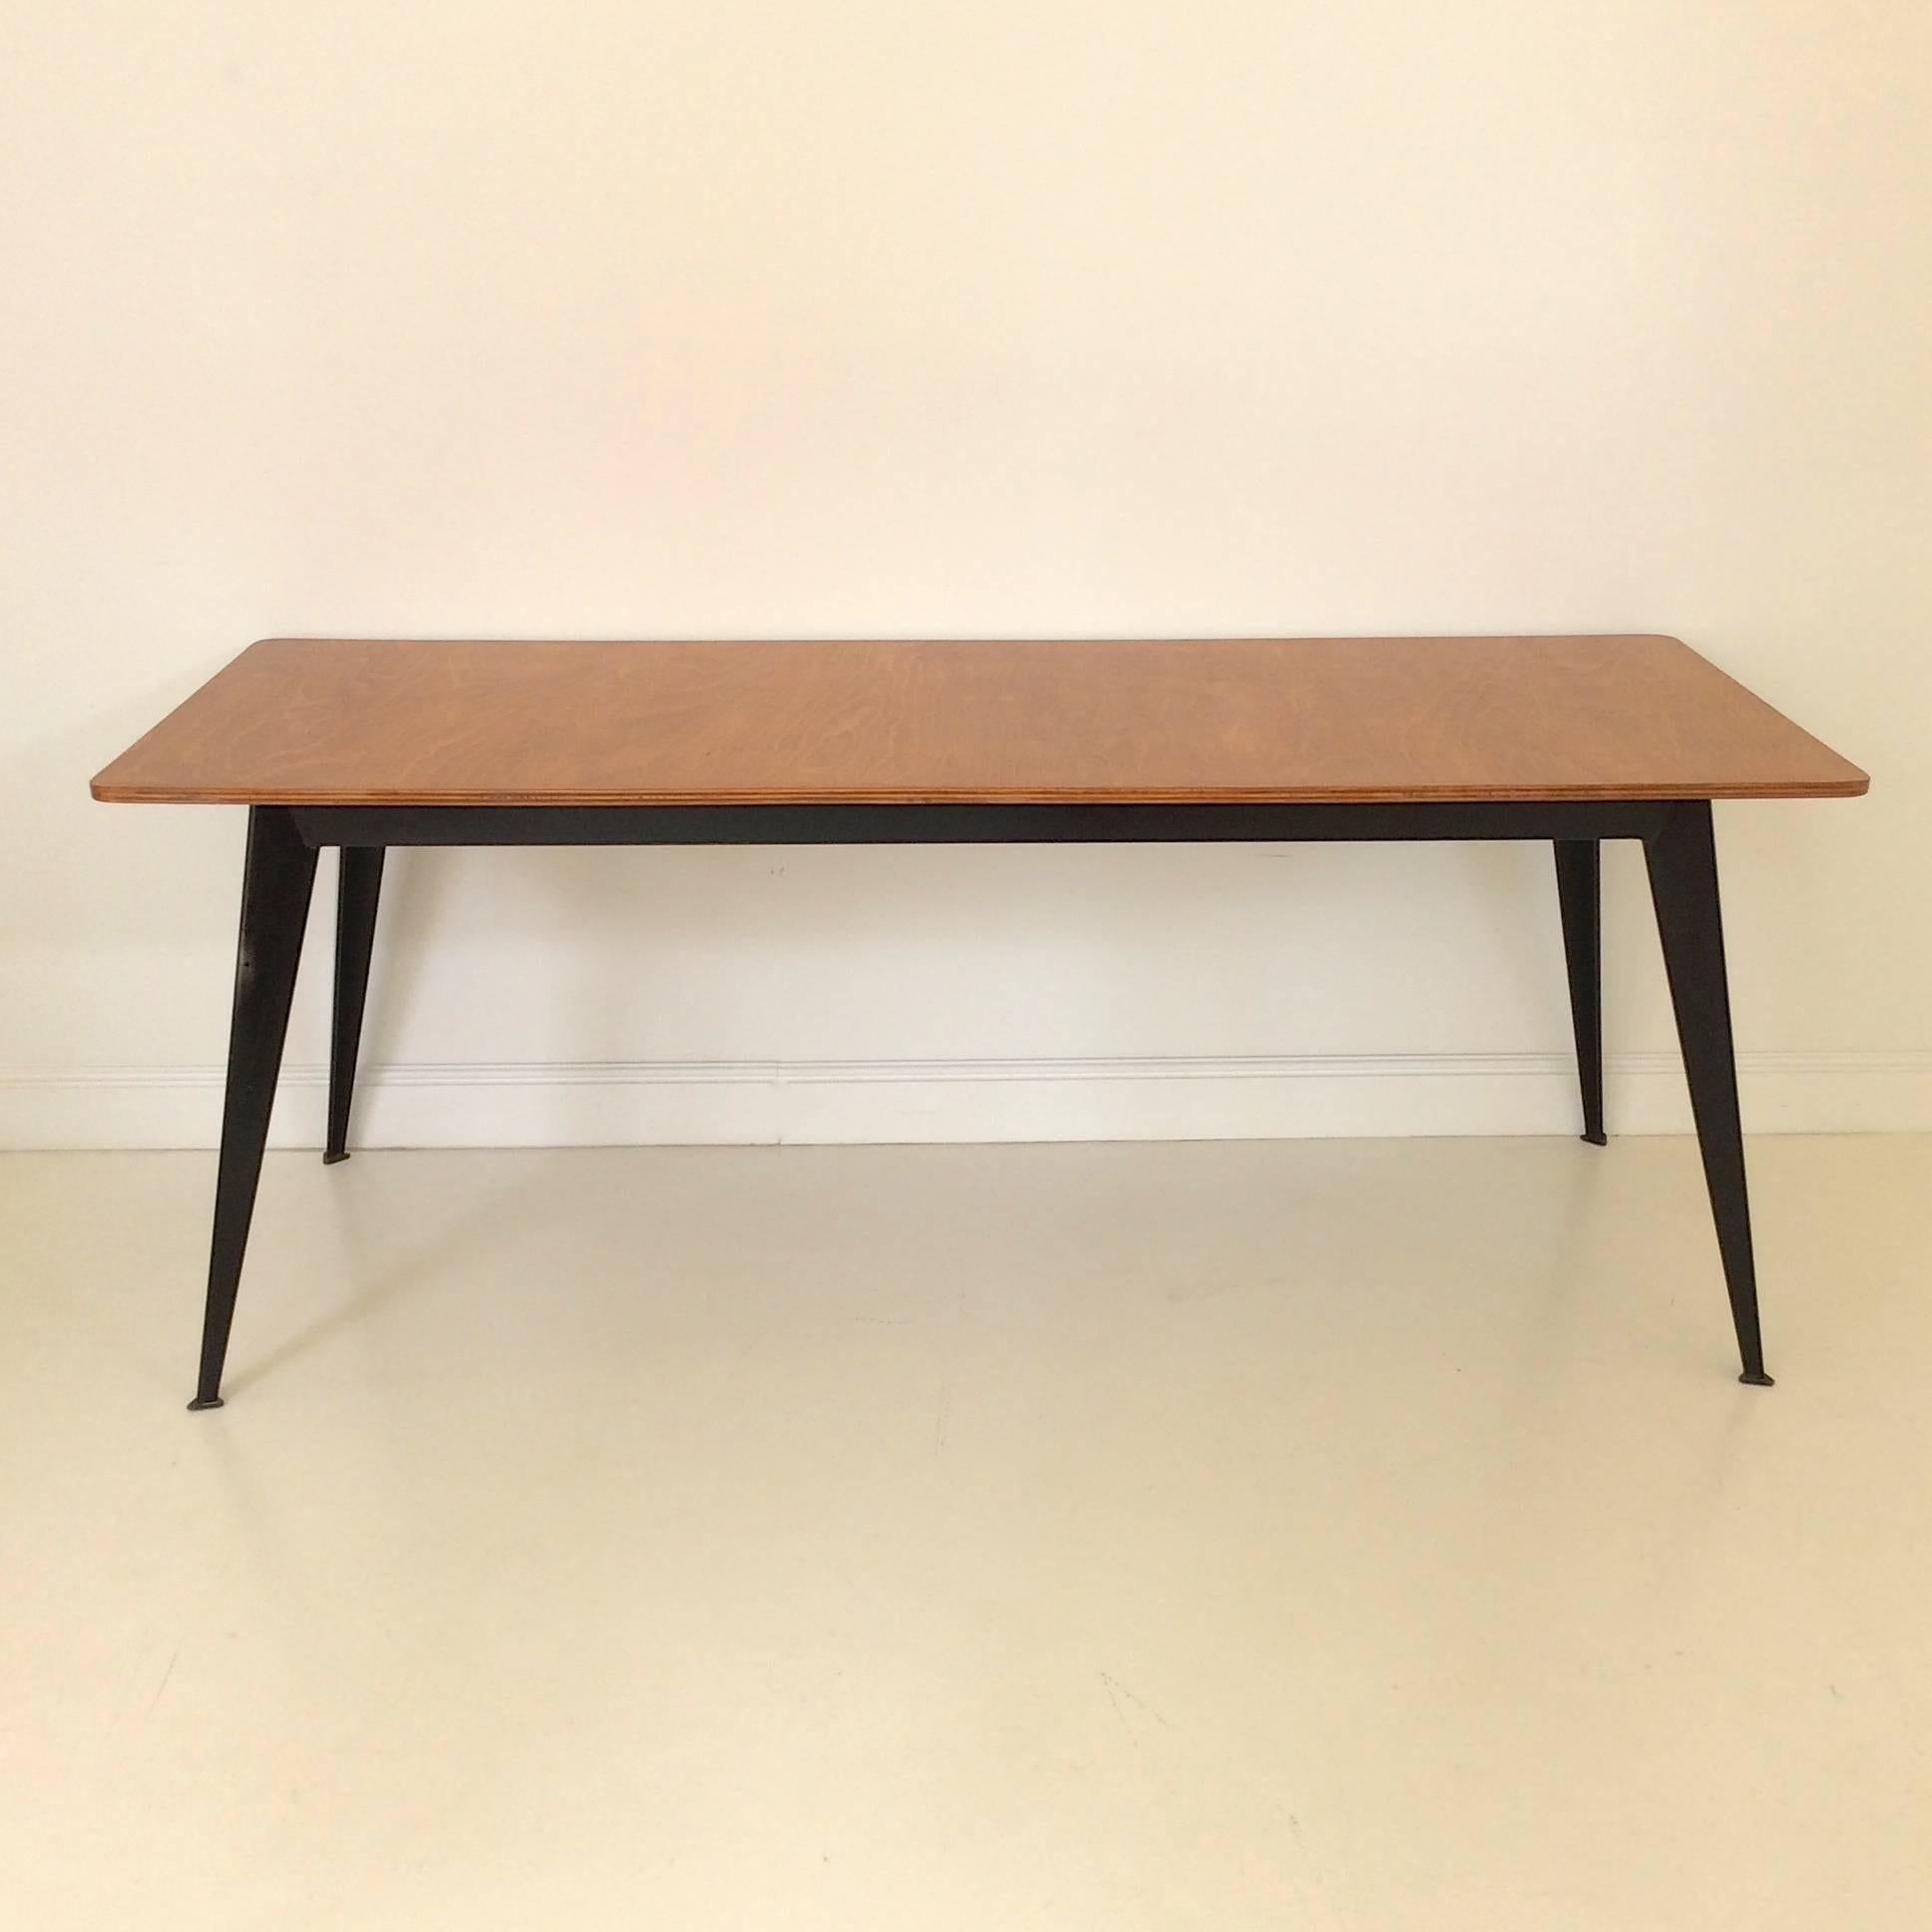 Rare Willy Van Der Meeren dining table for Tubax, 1954, Belgium.
Very small production.
Birch multiplex top and black lacquered metal structure.
Dimensions: W 183 cm, D 70 cm, H 73 cm.
Good original condition.